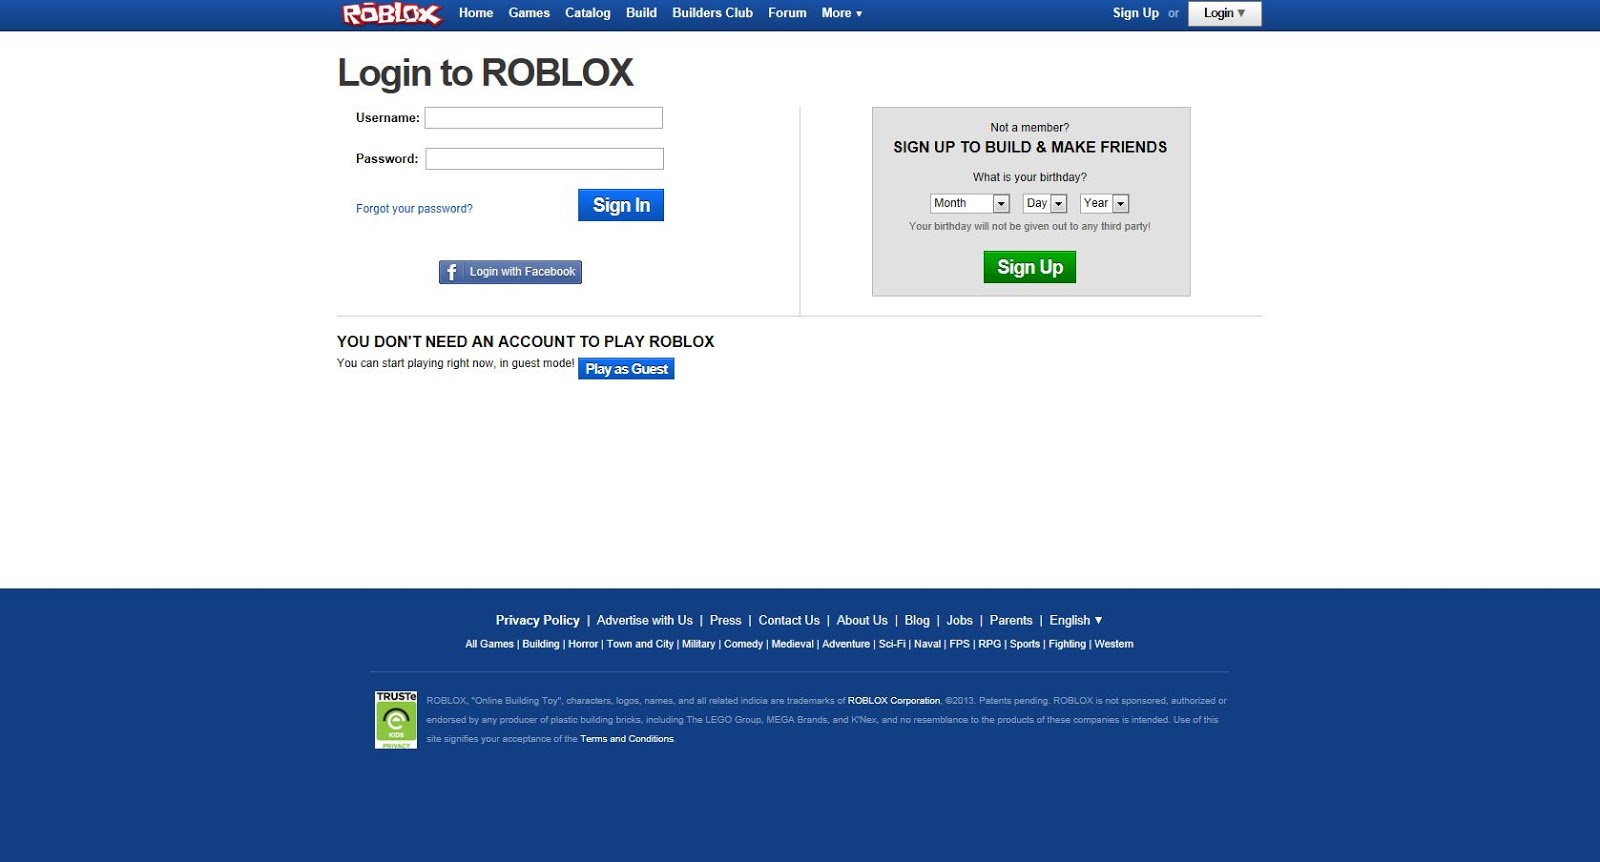 Unofficial Roblox July 2013